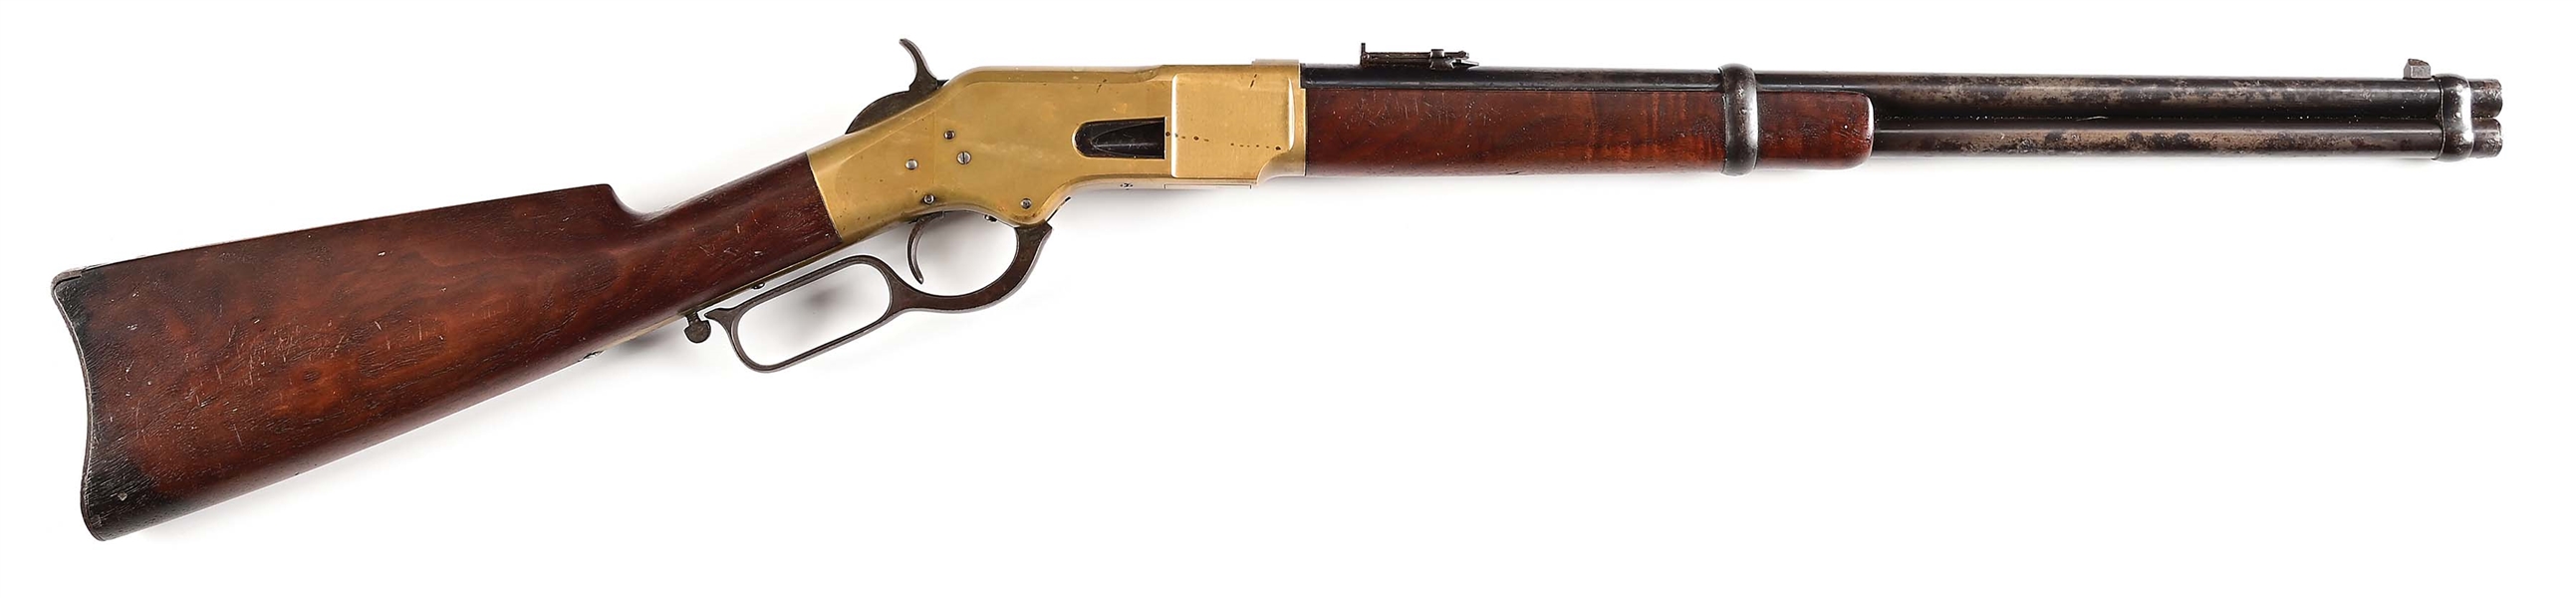 LATE WINCHESTER MODEL 1866 SADDLE RING CARBINE